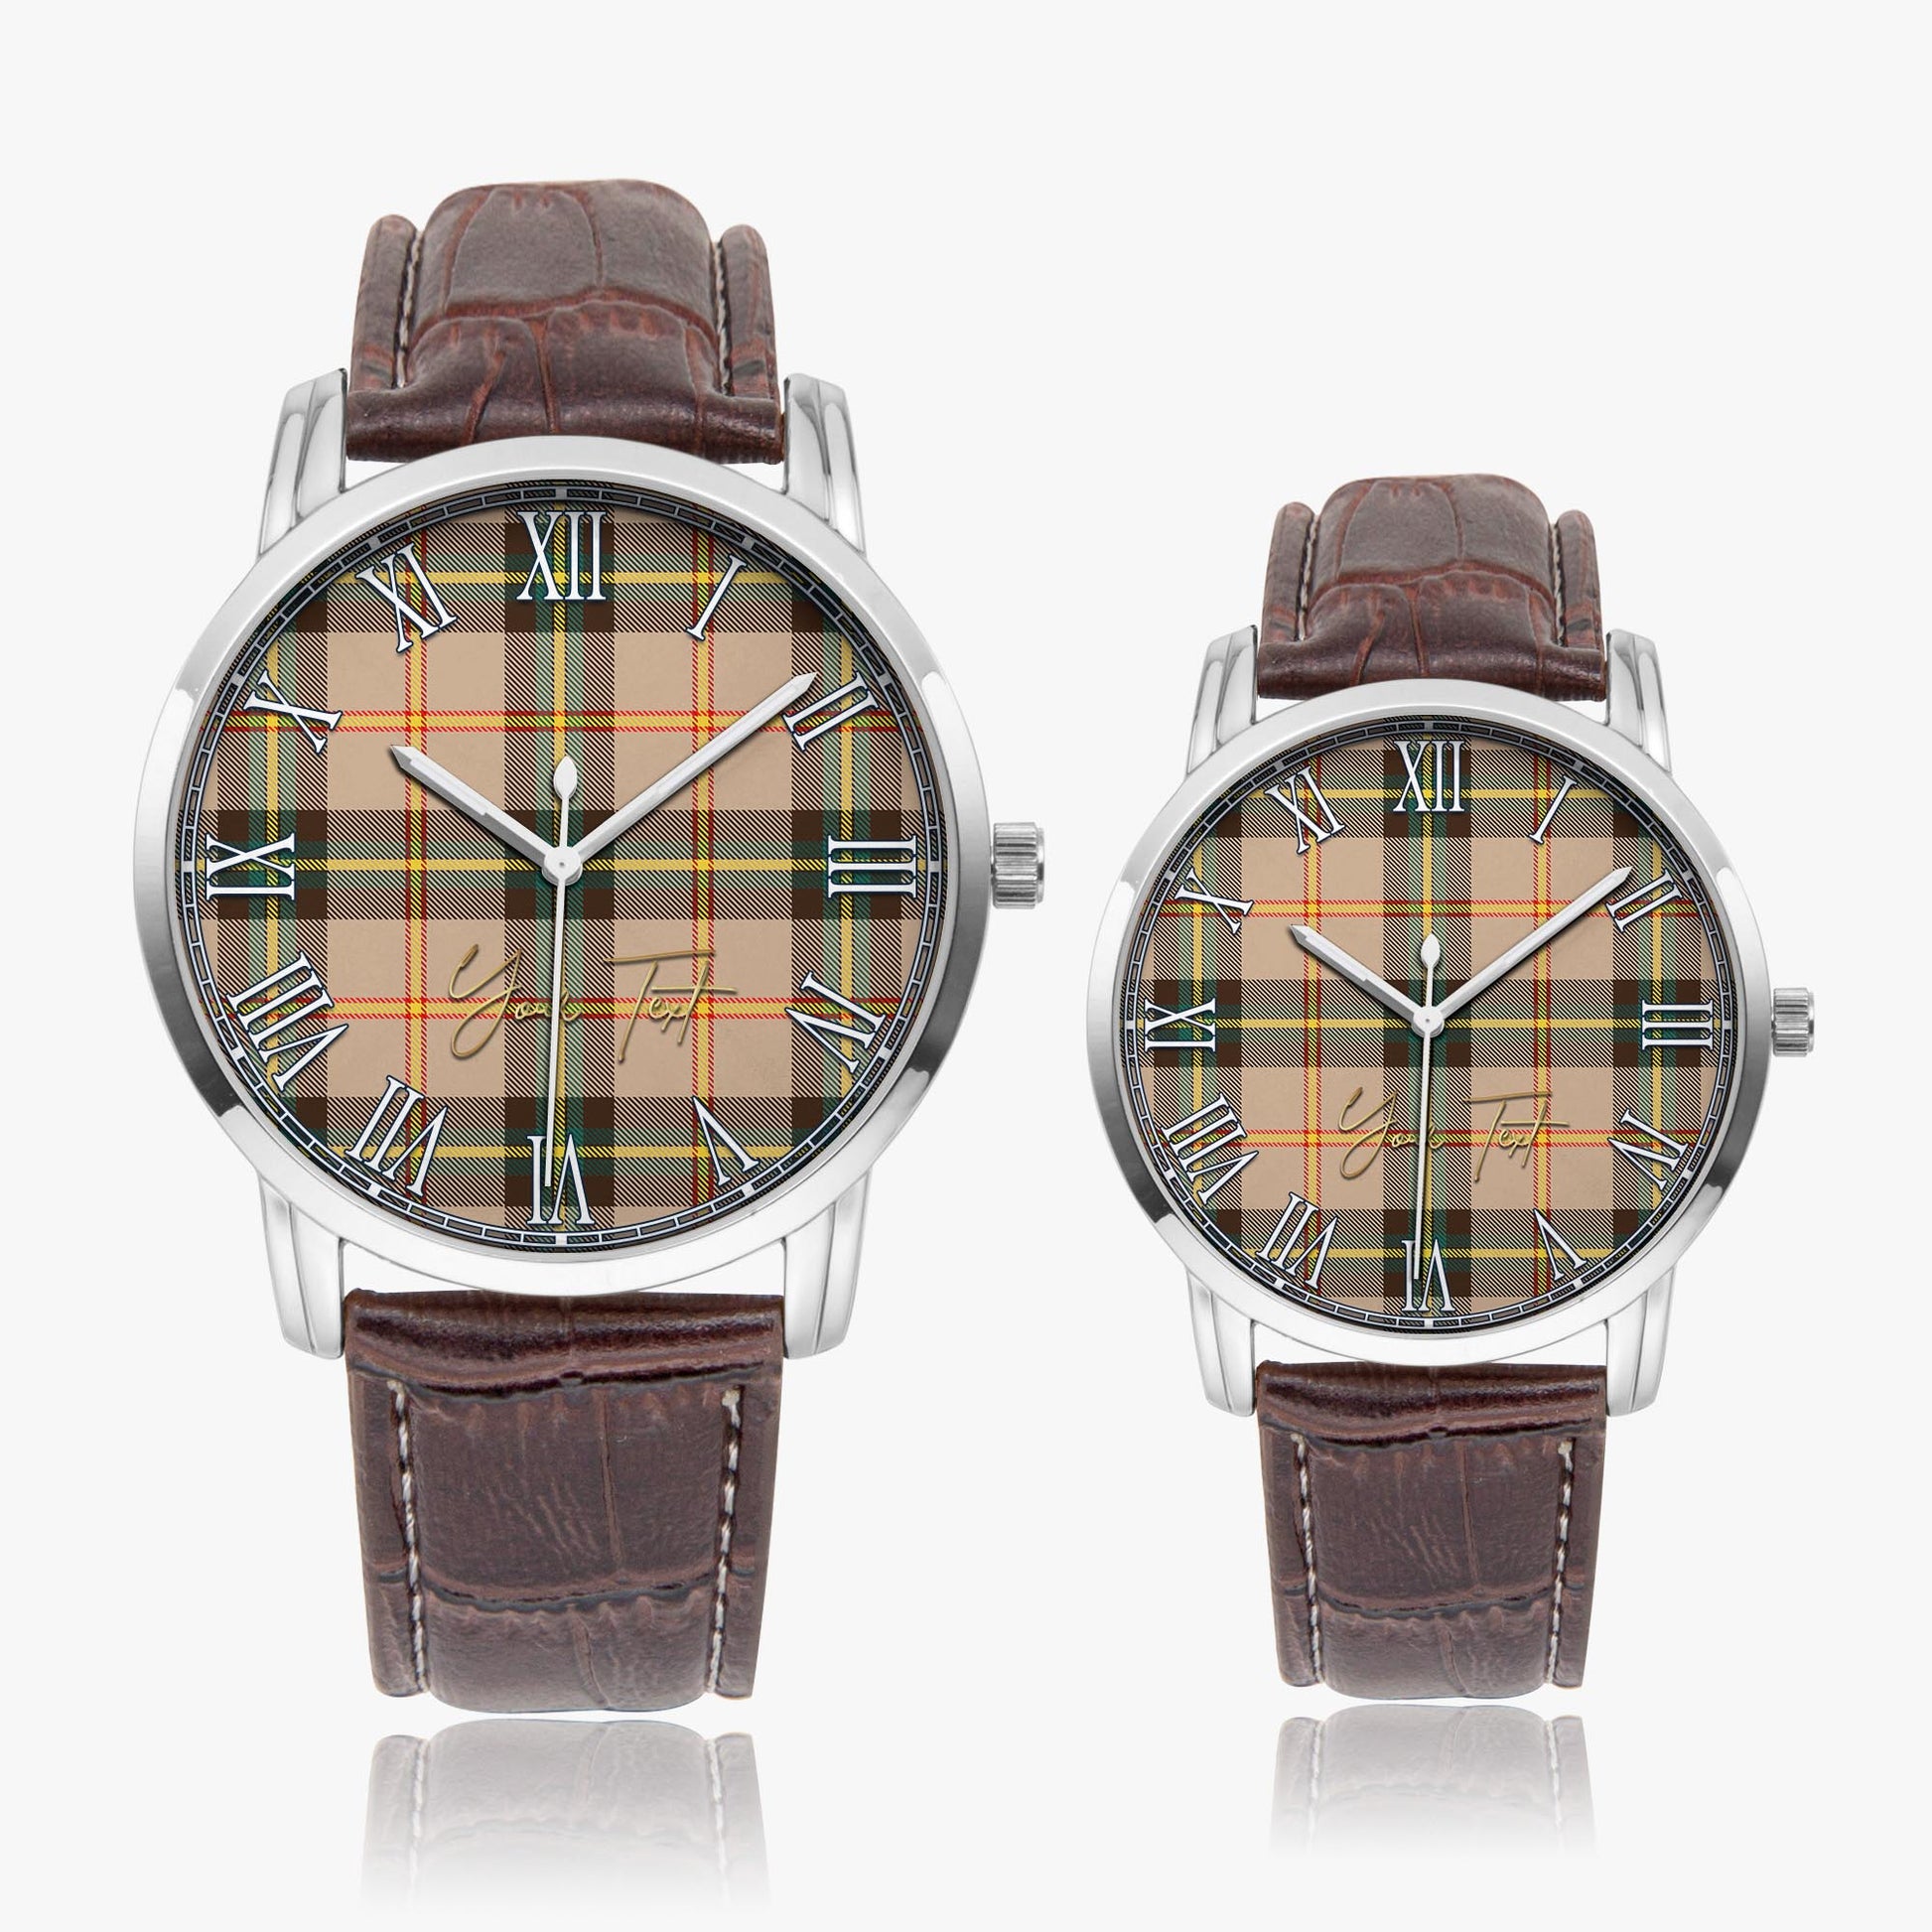 Saskatchewan Province Canada Tartan Personalized Your Text Leather Trap Quartz Watch Wide Type Silver Case With Brown Leather Strap - Tartanvibesclothing